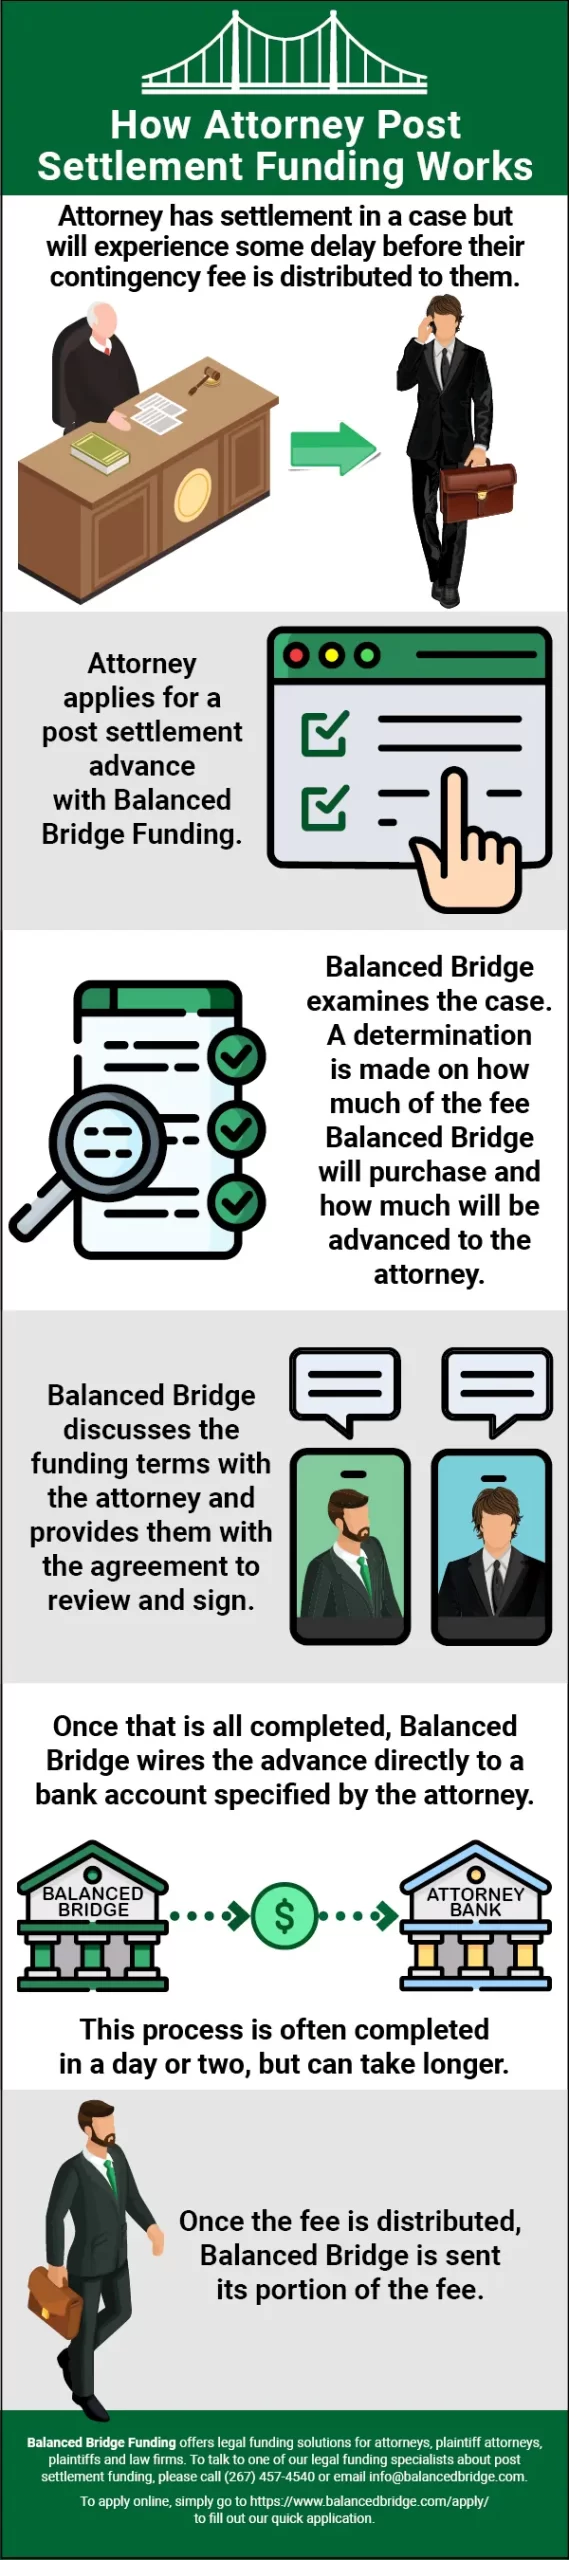 Infographic - How Post Settlement Funding for Attorneys Works. A full and detailed explanation of the post settlement funding process for attorneys. 